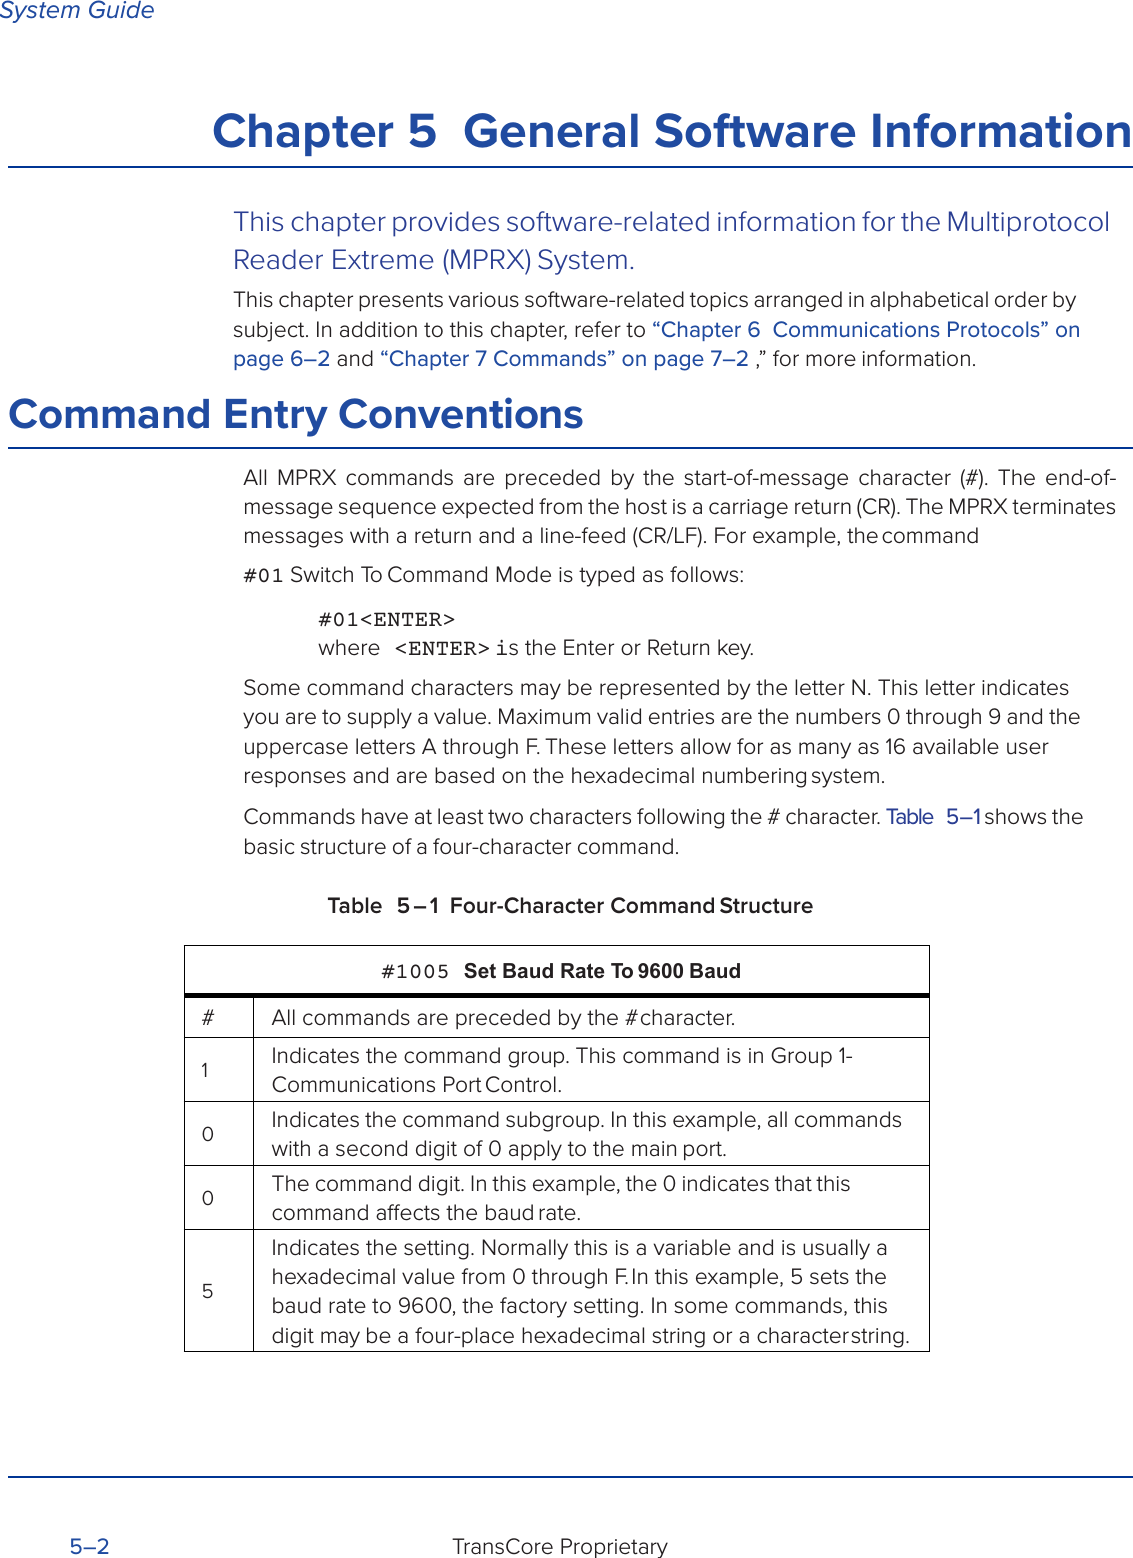 System GuideTransCore Proprietary 5–2 Chapter 5  General Software InformationThis chapter provides software-related information for the Multiprotocol Reader Extreme (MPRX) System.This chapter presents various software-related topics arranged in alphabetical order by subject. In addition to this chapter, refer to “Chapter 6  Communications Protocols” on page 6–2 and “Chapter 7 Commands” on page 7–2 ,” for more information.Command Entry ConventionsAll MPRX commands are preceded by the start-of-message character (#). The end-of- message sequence expected from the host is a carriage return (CR). The MPRX terminates messages with a return and a line-feed (CR/LF). For example, the command#01 Switch To Command Mode is typed as follows:#01&lt;ENTER&gt; where  &lt;ENTER&gt; is the Enter or Return key.Some command characters may be represented by the letter N. This letter indicates you are to supply a value. Maximum valid entries are the numbers 0 through 9 and the uppercase letters A through F. These letters allow for as many as 16 available user responses and are based on the hexadecimal numbering system.Commands have at least two characters following the # character. Table 5 – 1 shows the basic structure of a four-character command.Table 5 – 1 Four-Character Command Structure#1005 Set Baud Rate To 9600 Baud# All commands are preceded by the # character.1Indicates the command group. This command is in Group 1- Communications  Port Control.0Indicates the command subgroup. In this example, all commands with a second digit of 0 apply to the main port.0The command digit. In this example, the 0 indicates that this command aects the baud rate.5Indicates the setting. Normally this is a variable and is usually a hexadecimal value from 0 through F. In this example, 5 sets the baud rate to 9600, the factory setting. In some commands, this digit may be a four-place hexadecimal string or a character string.